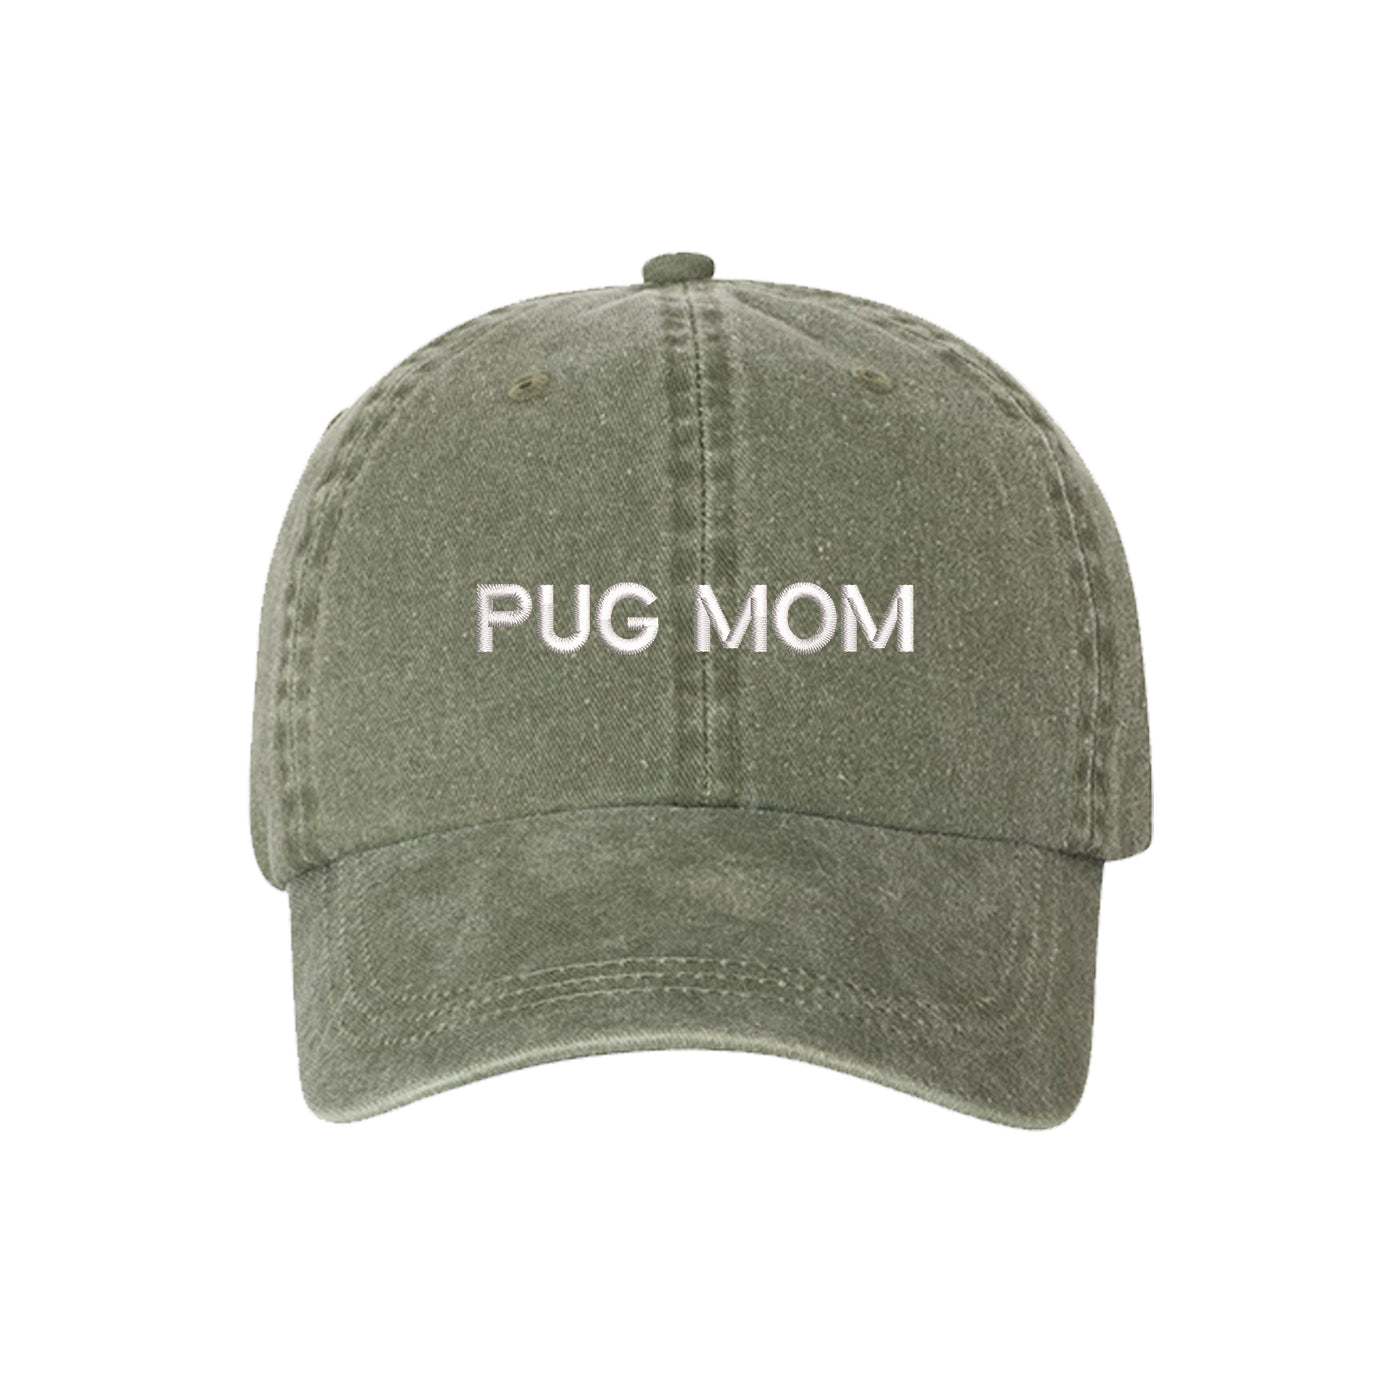 Pug Mom Washed Baseball Hat, Pug Mom Dad Hat, Dog Parent Hats, Embroidered Dad hat, Animal Lover Gifts, Pug Mother, Mothers Day Gift, Pug Mama, DSY Lifestyle Dad Hats, Olive Washed Baseball Hat